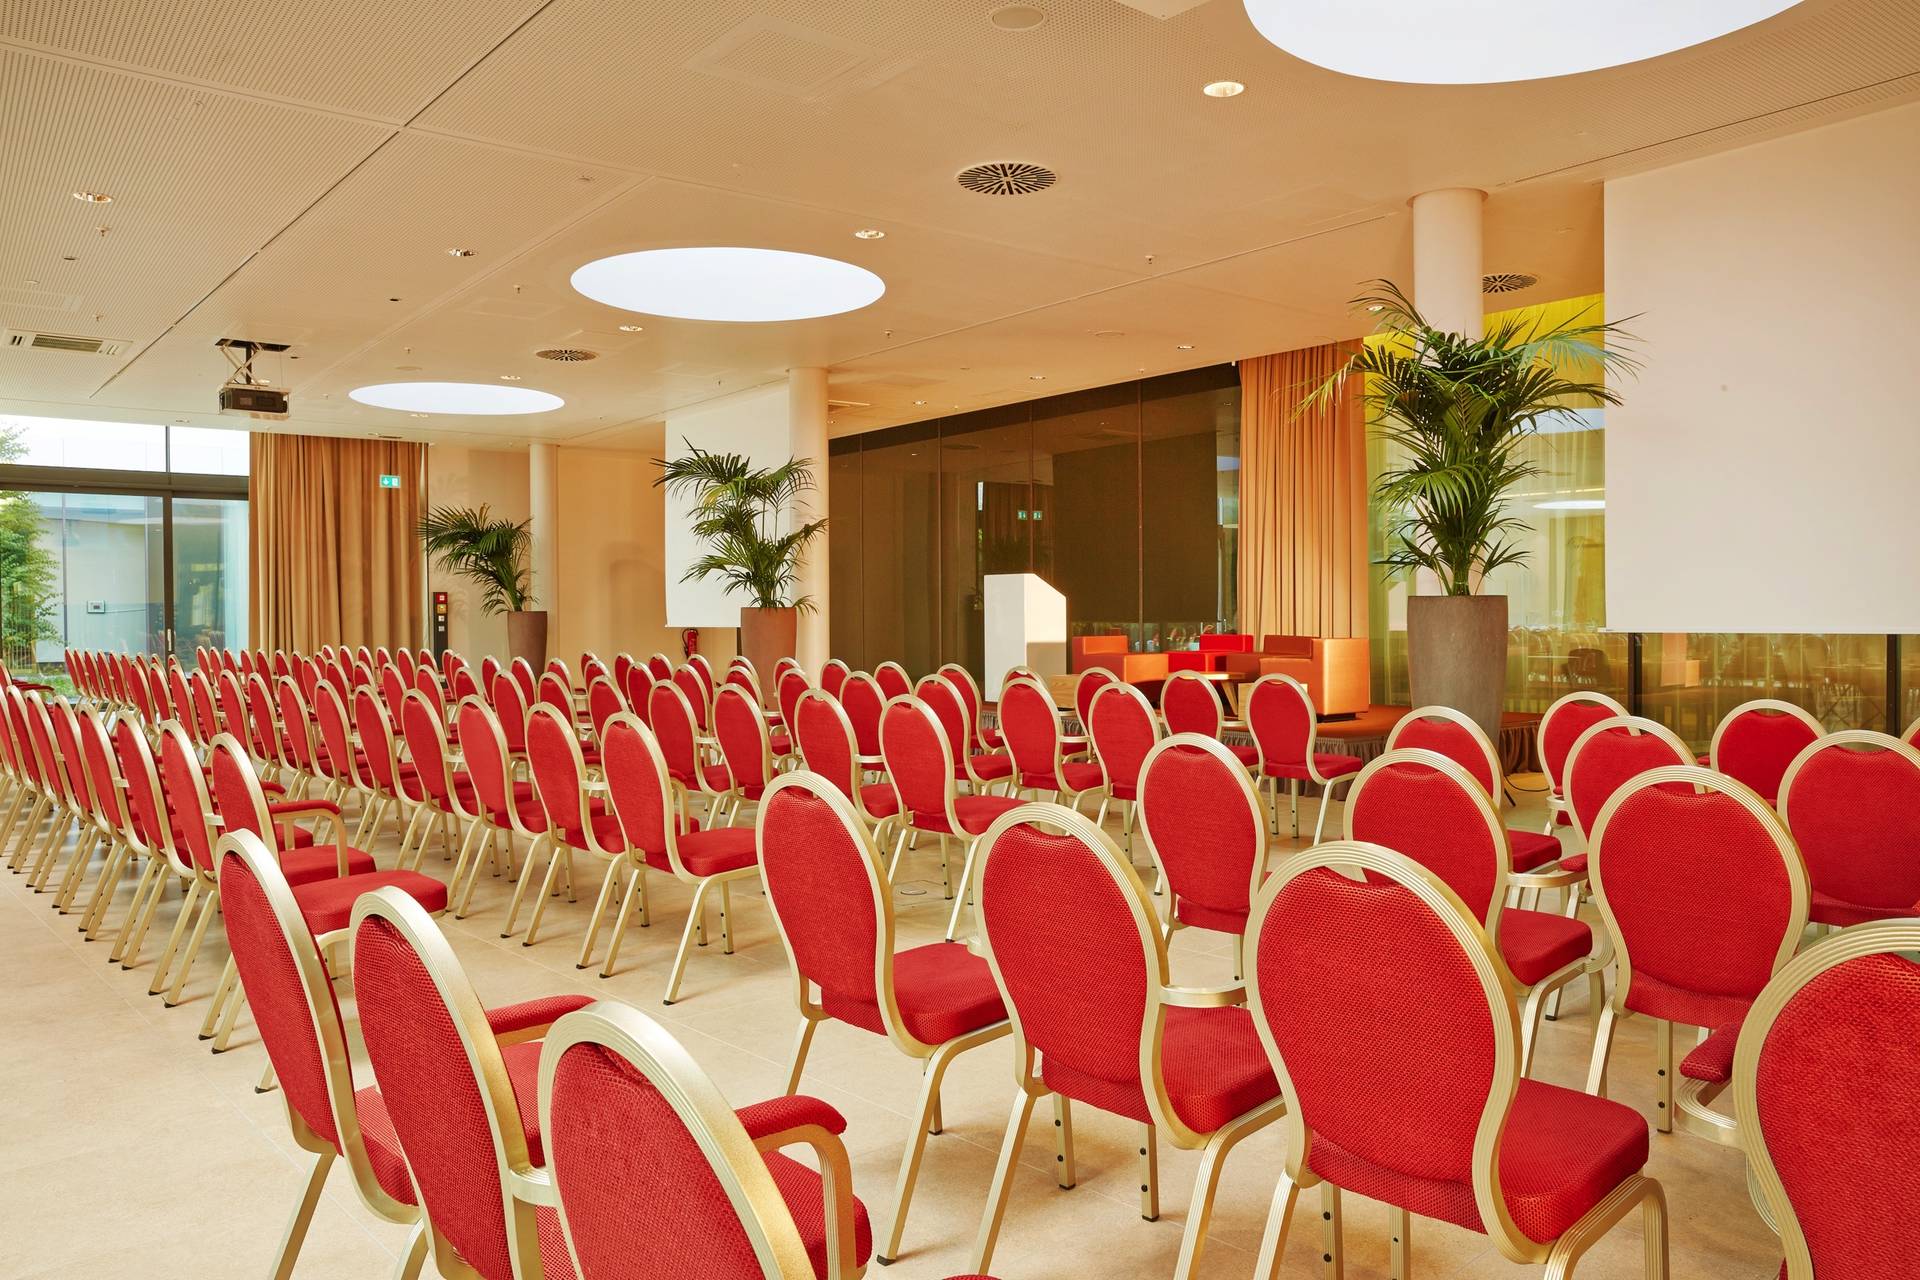 Meetings Incentives Conventions Events - H-Hotels.com - Offizielle Webseite